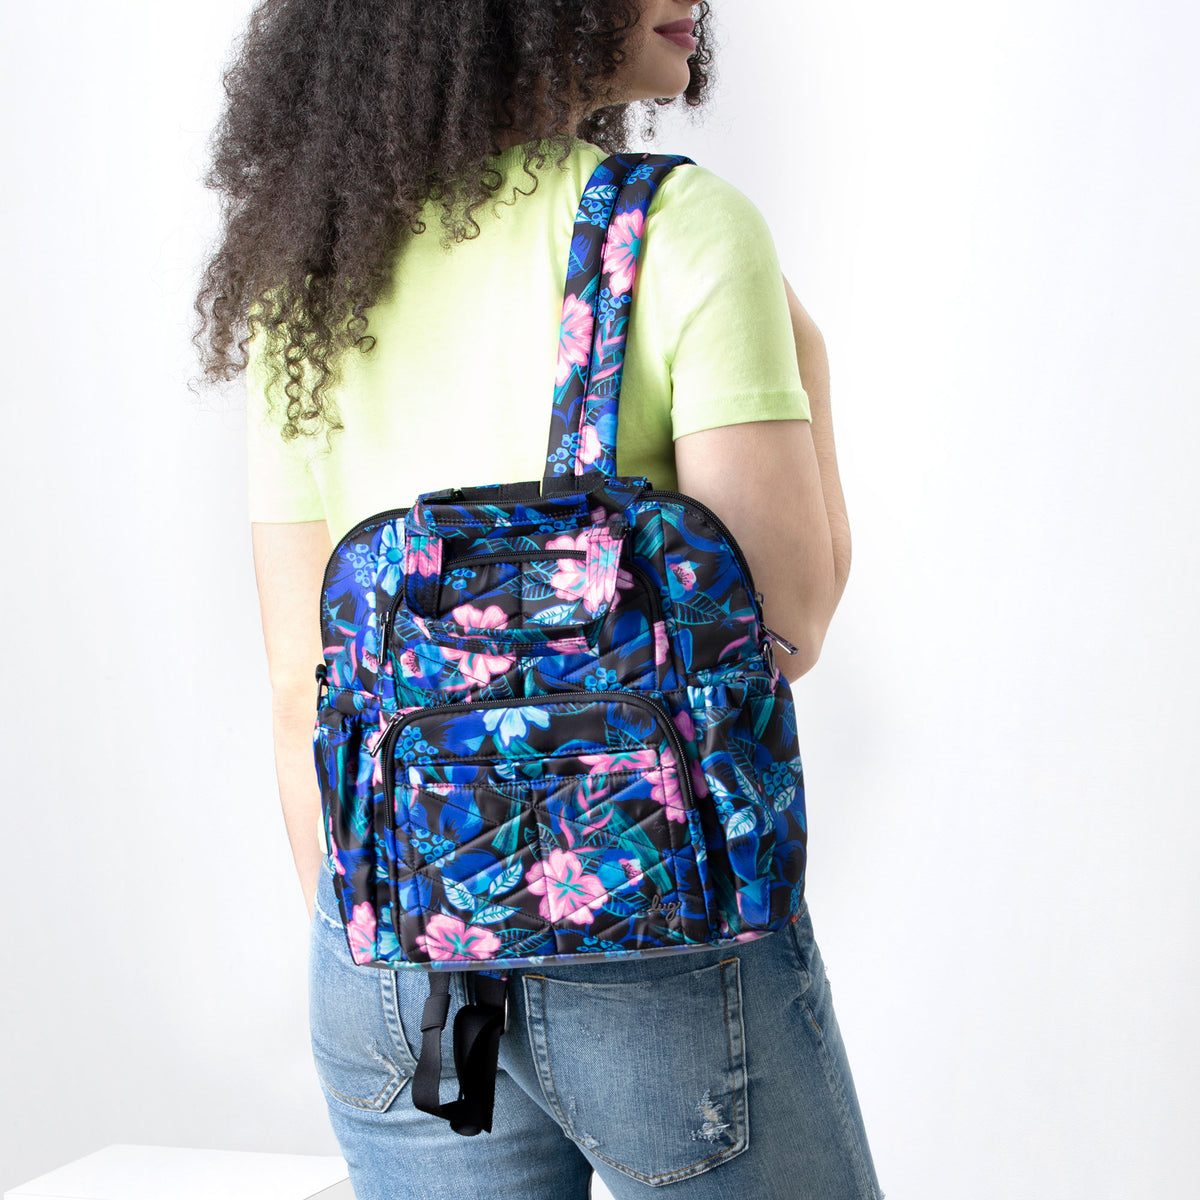 The Canter VL Convertible Tote Bag switches from a crossbody to